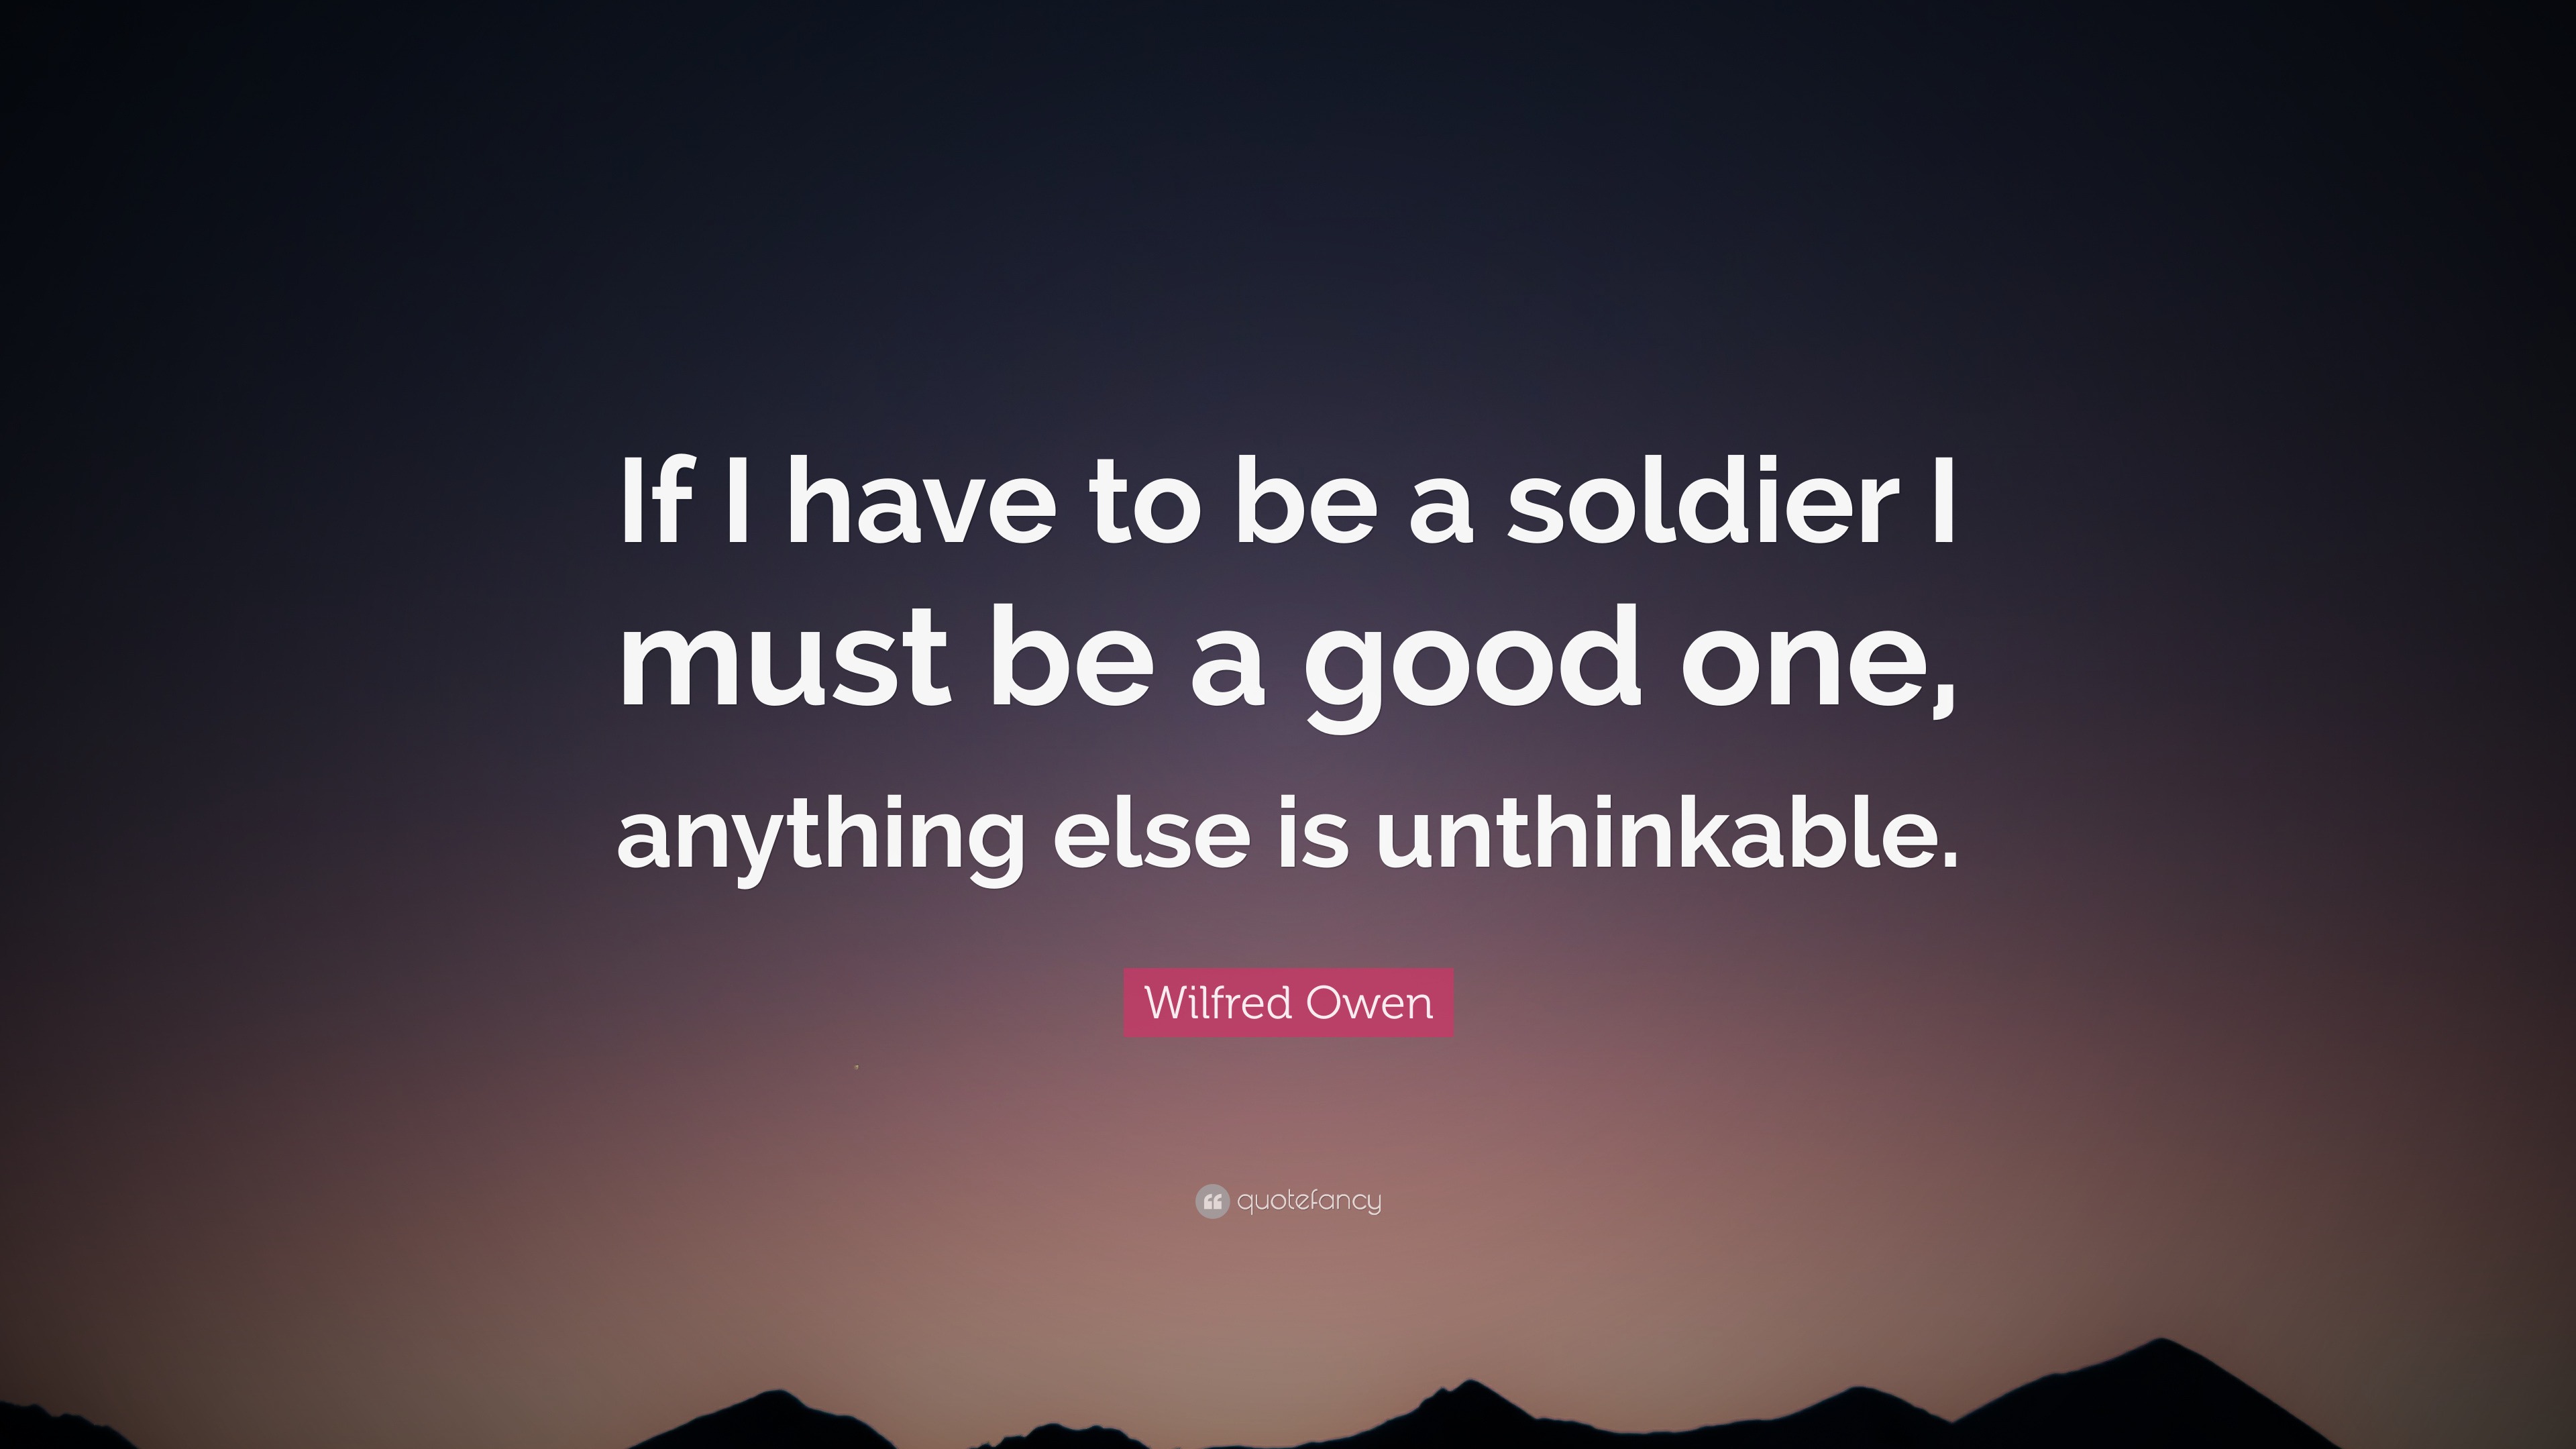 Wilfred Owen Quote: “If I have to be a soldier I must be a good one ...